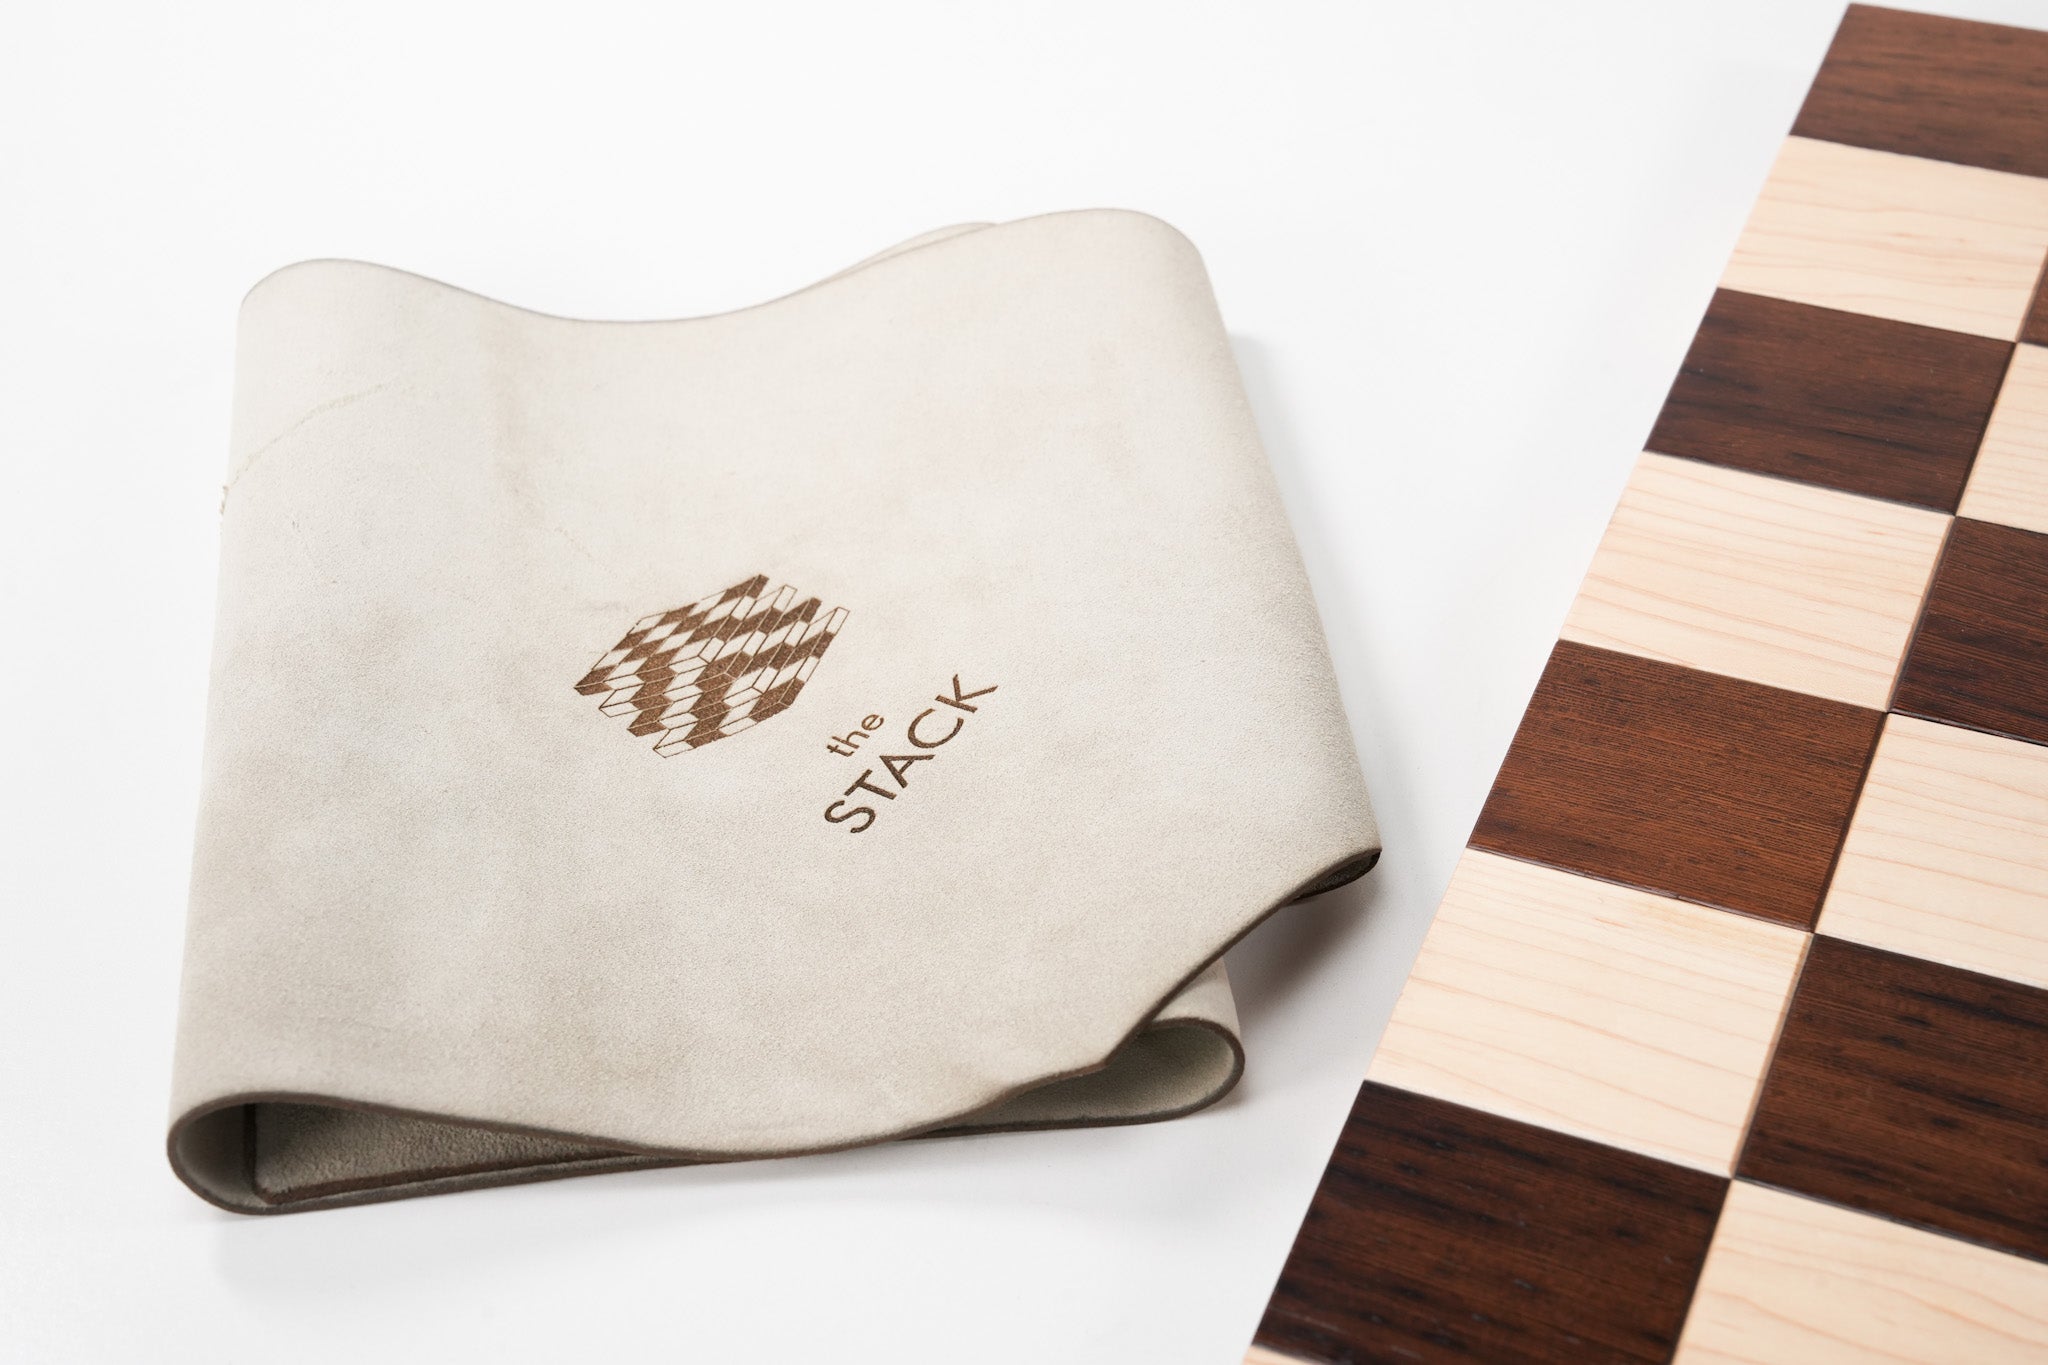 the STACK Chessboard - Tournament Edition - Light Wenge and Maple LIMITED EDITION - Board - Chess-House